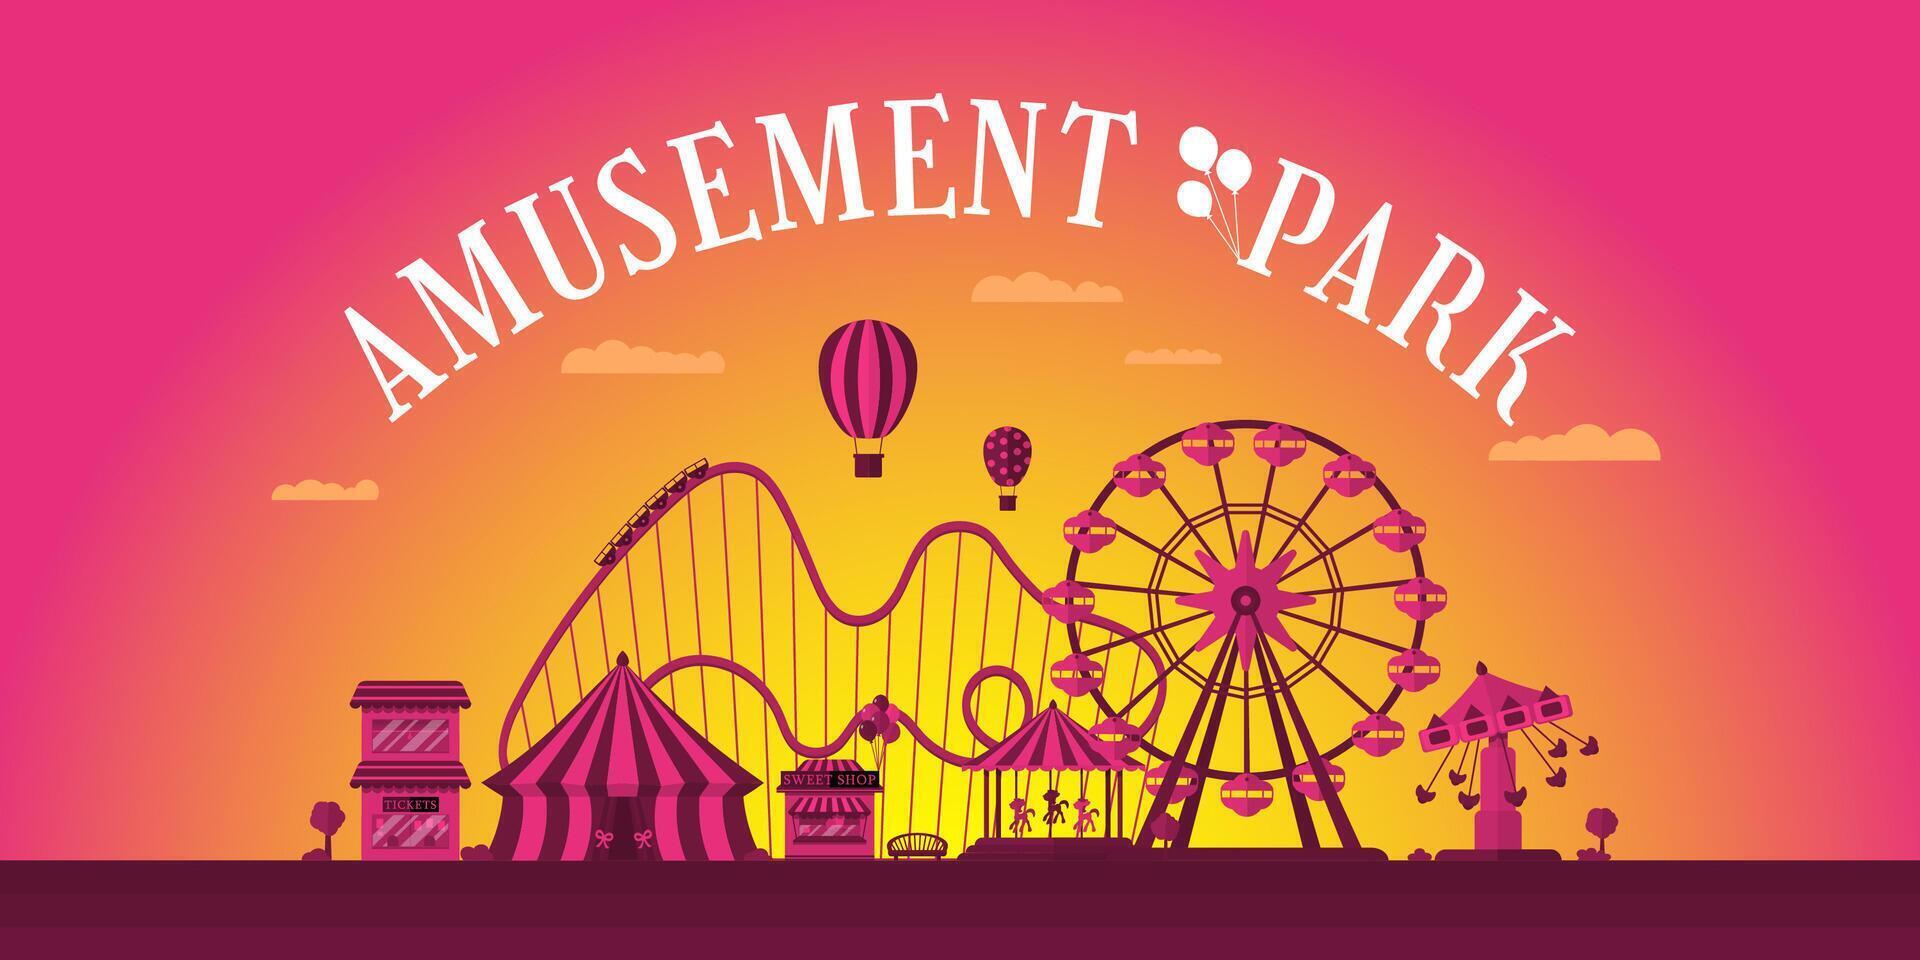 Amusement park horizontal banner design template. Circus carousels roller coaster and attractions. Fun fair and carnival theme landscape. Ferris wheel and merry-go-round festival advertising eps card vector